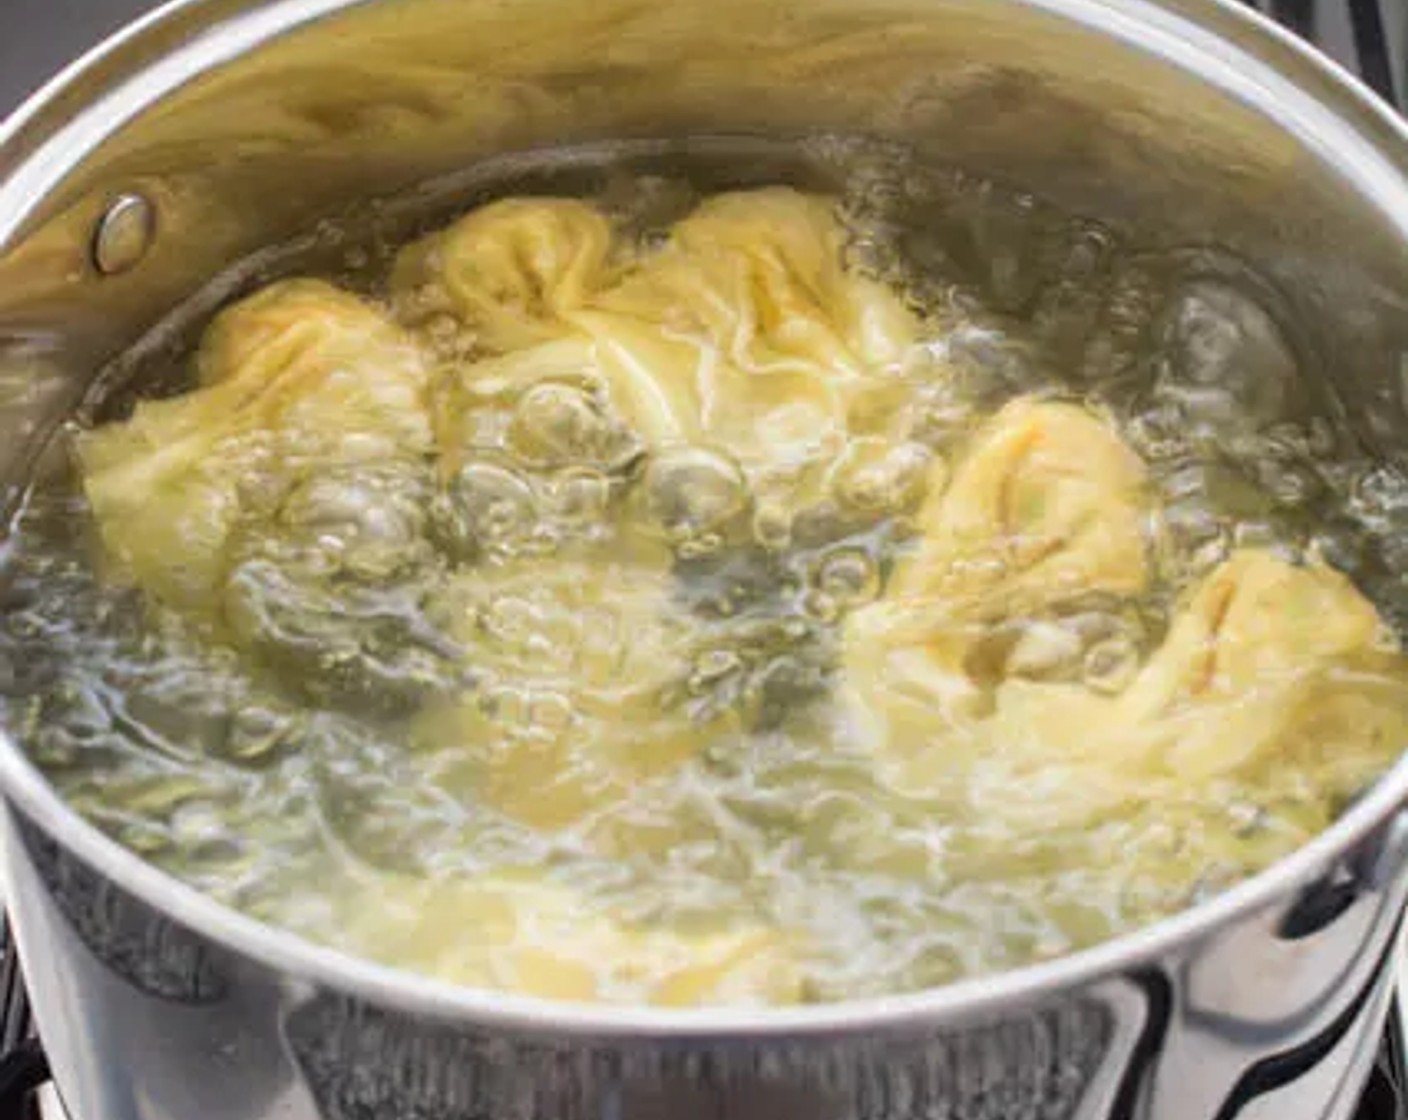 step 4 Bring a medium-sized pot of water to a boil over high heat. Cook the wontons in small batches. You’ll know when they’re cooked when they float to the top.